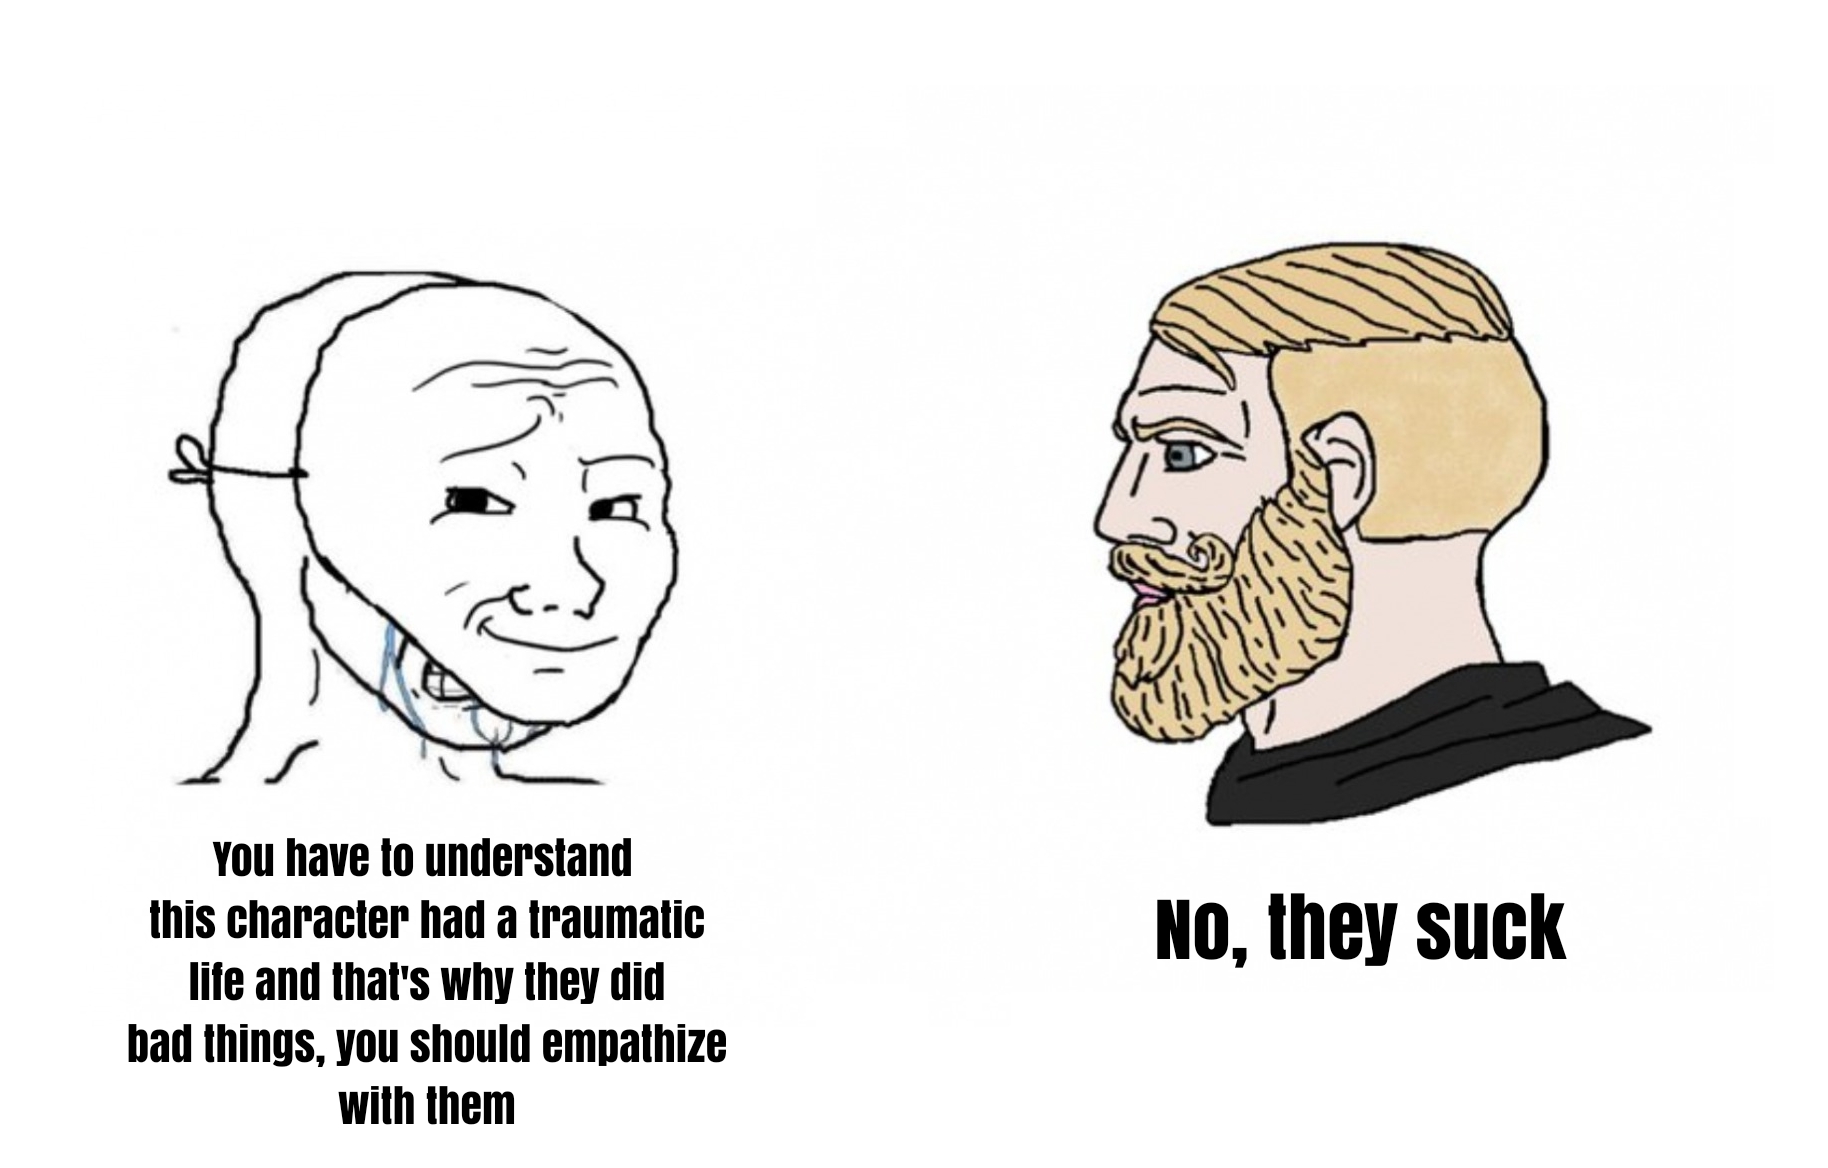 dank memes - funny memes - wojak philosophy - You have to understand this character had a traumatic life and that's why they did bad things, you should empathize with them No, they suck